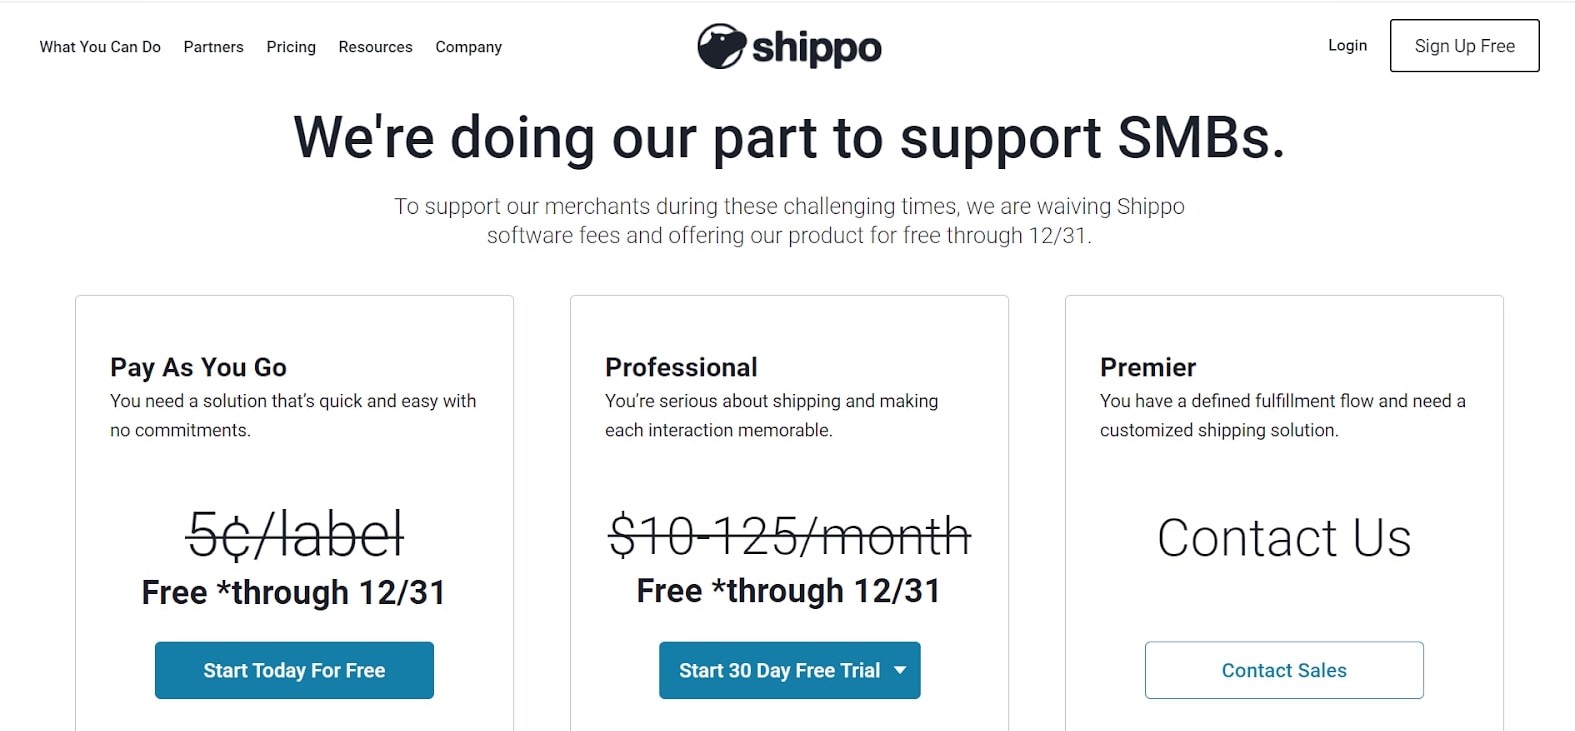 Shippo’s pricing plans